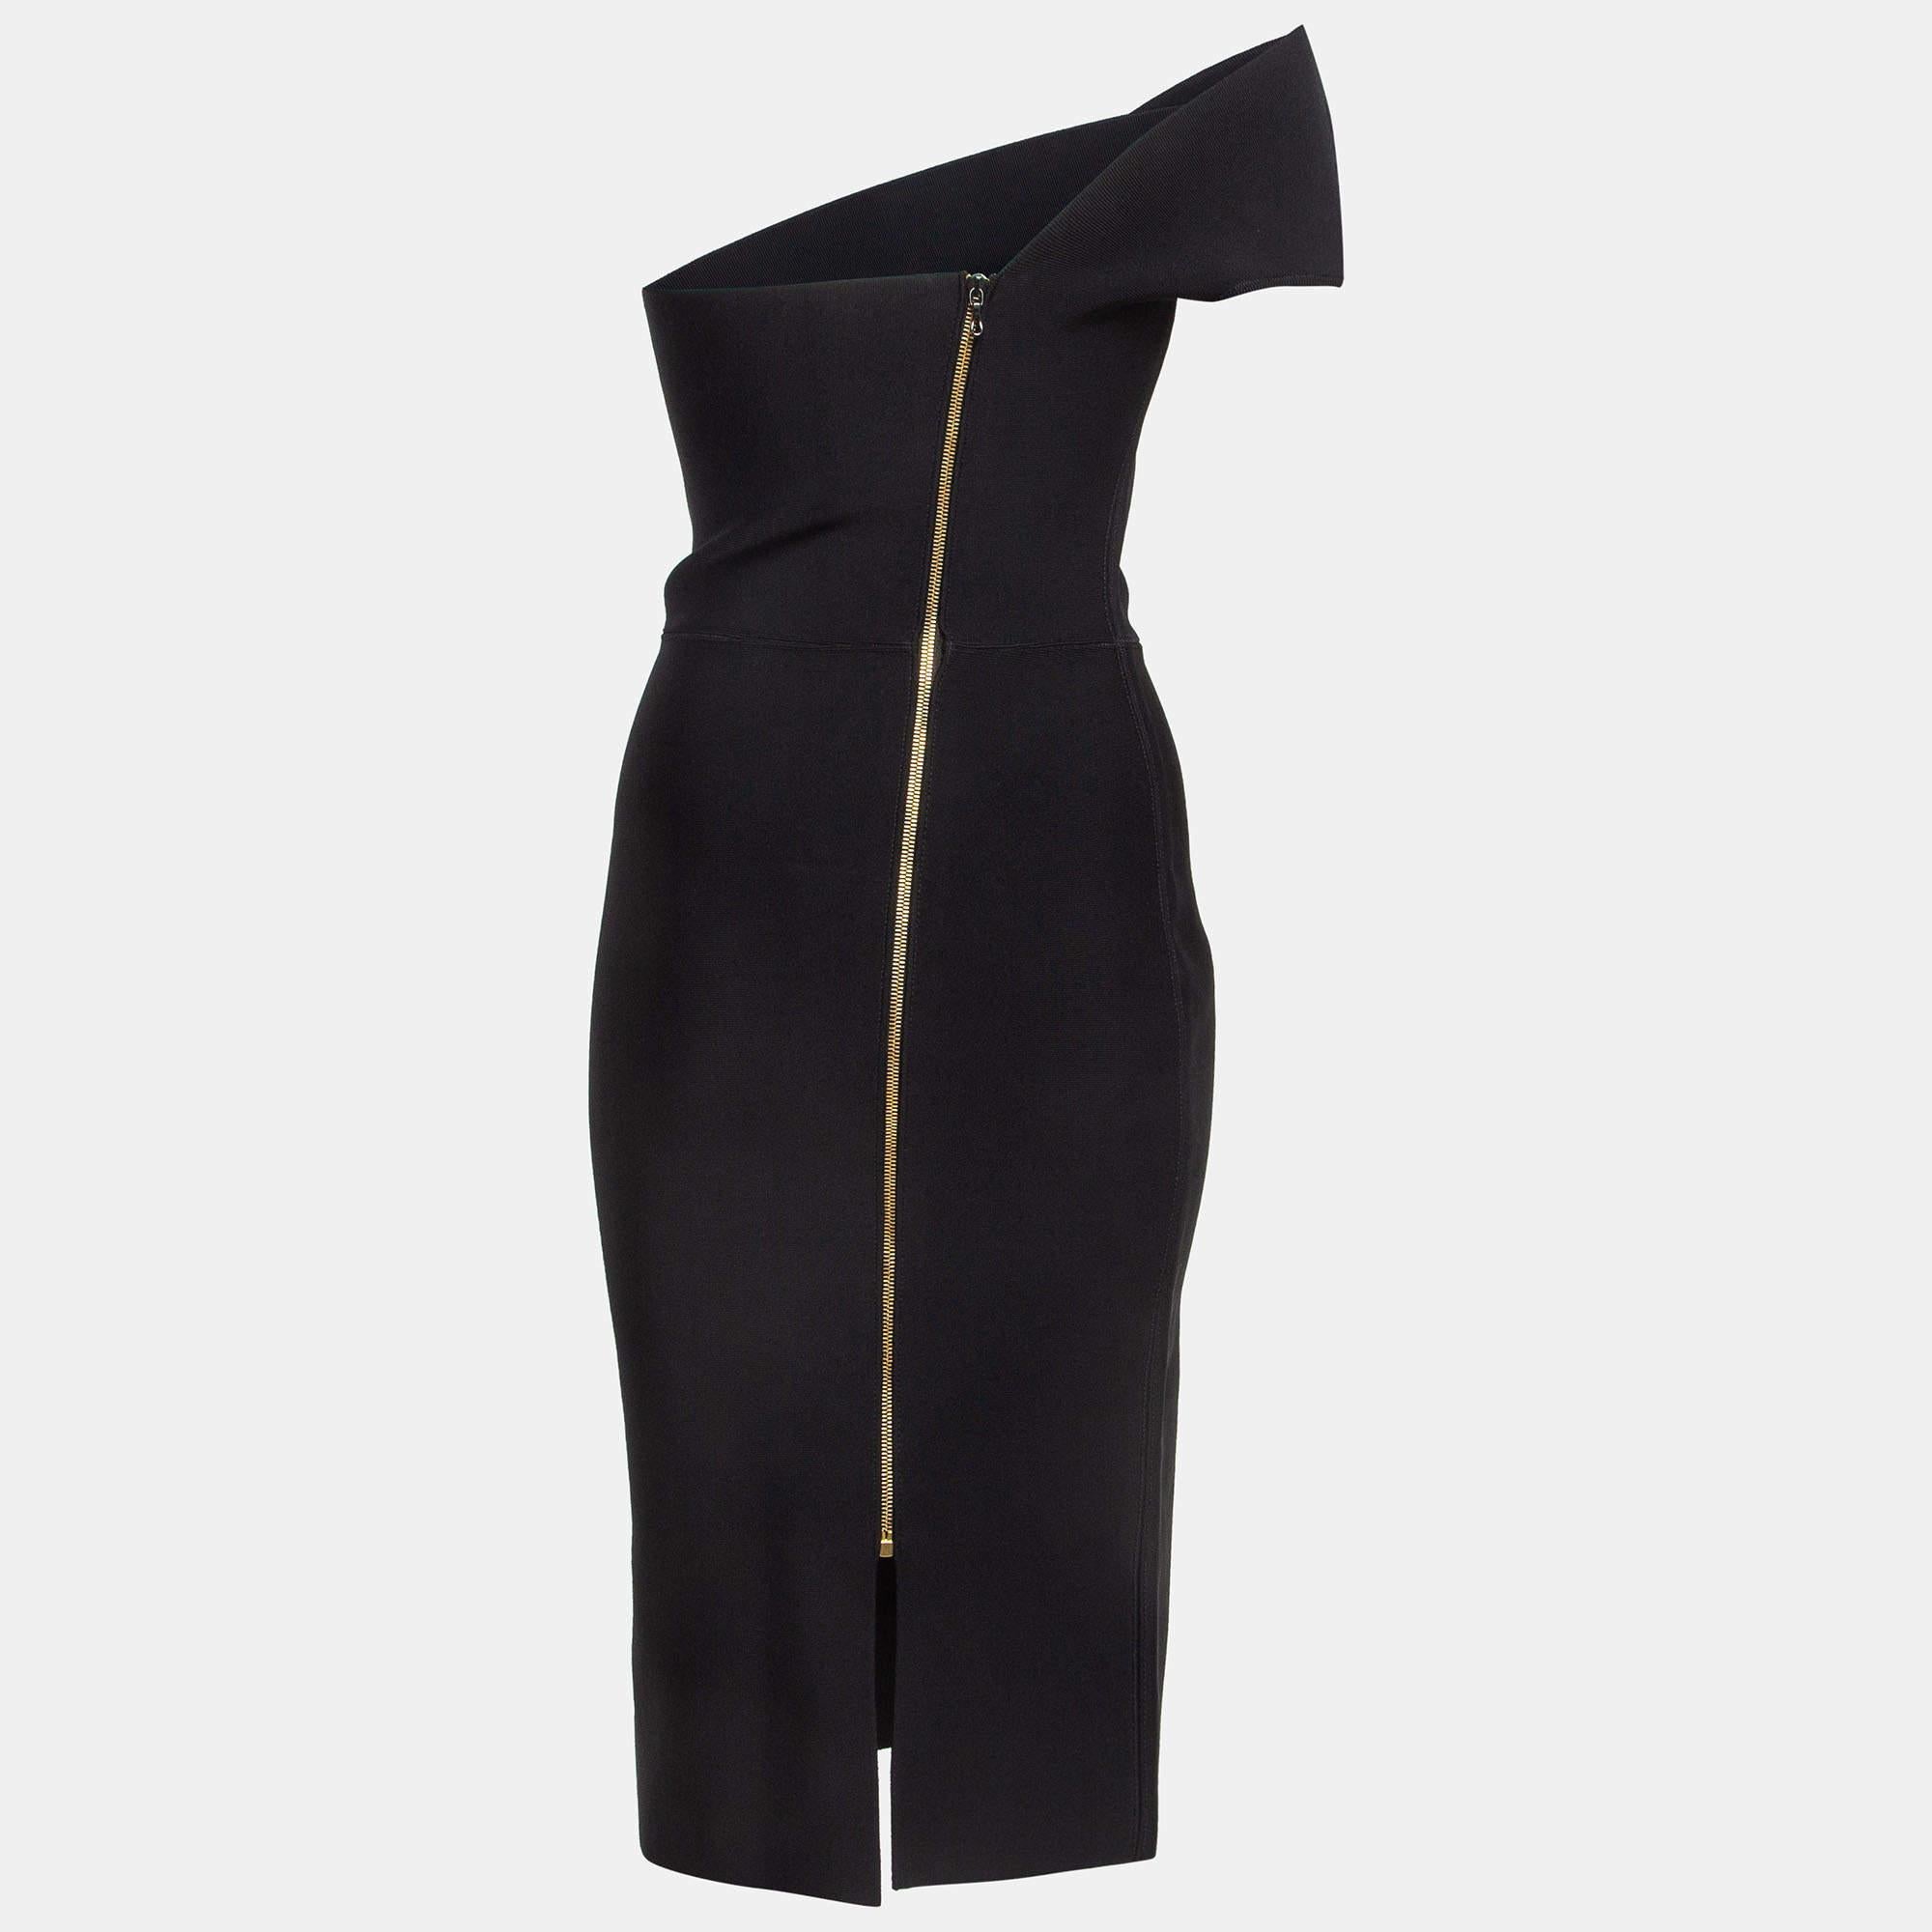 The fine artistry and the feminine silhouette of this Roland Mouret dress exhibit the label's impeccable craftsmanship in tailoring. It is stitched using quality materials, has a good fit, and can be easily styled with chic accessories, open-toe